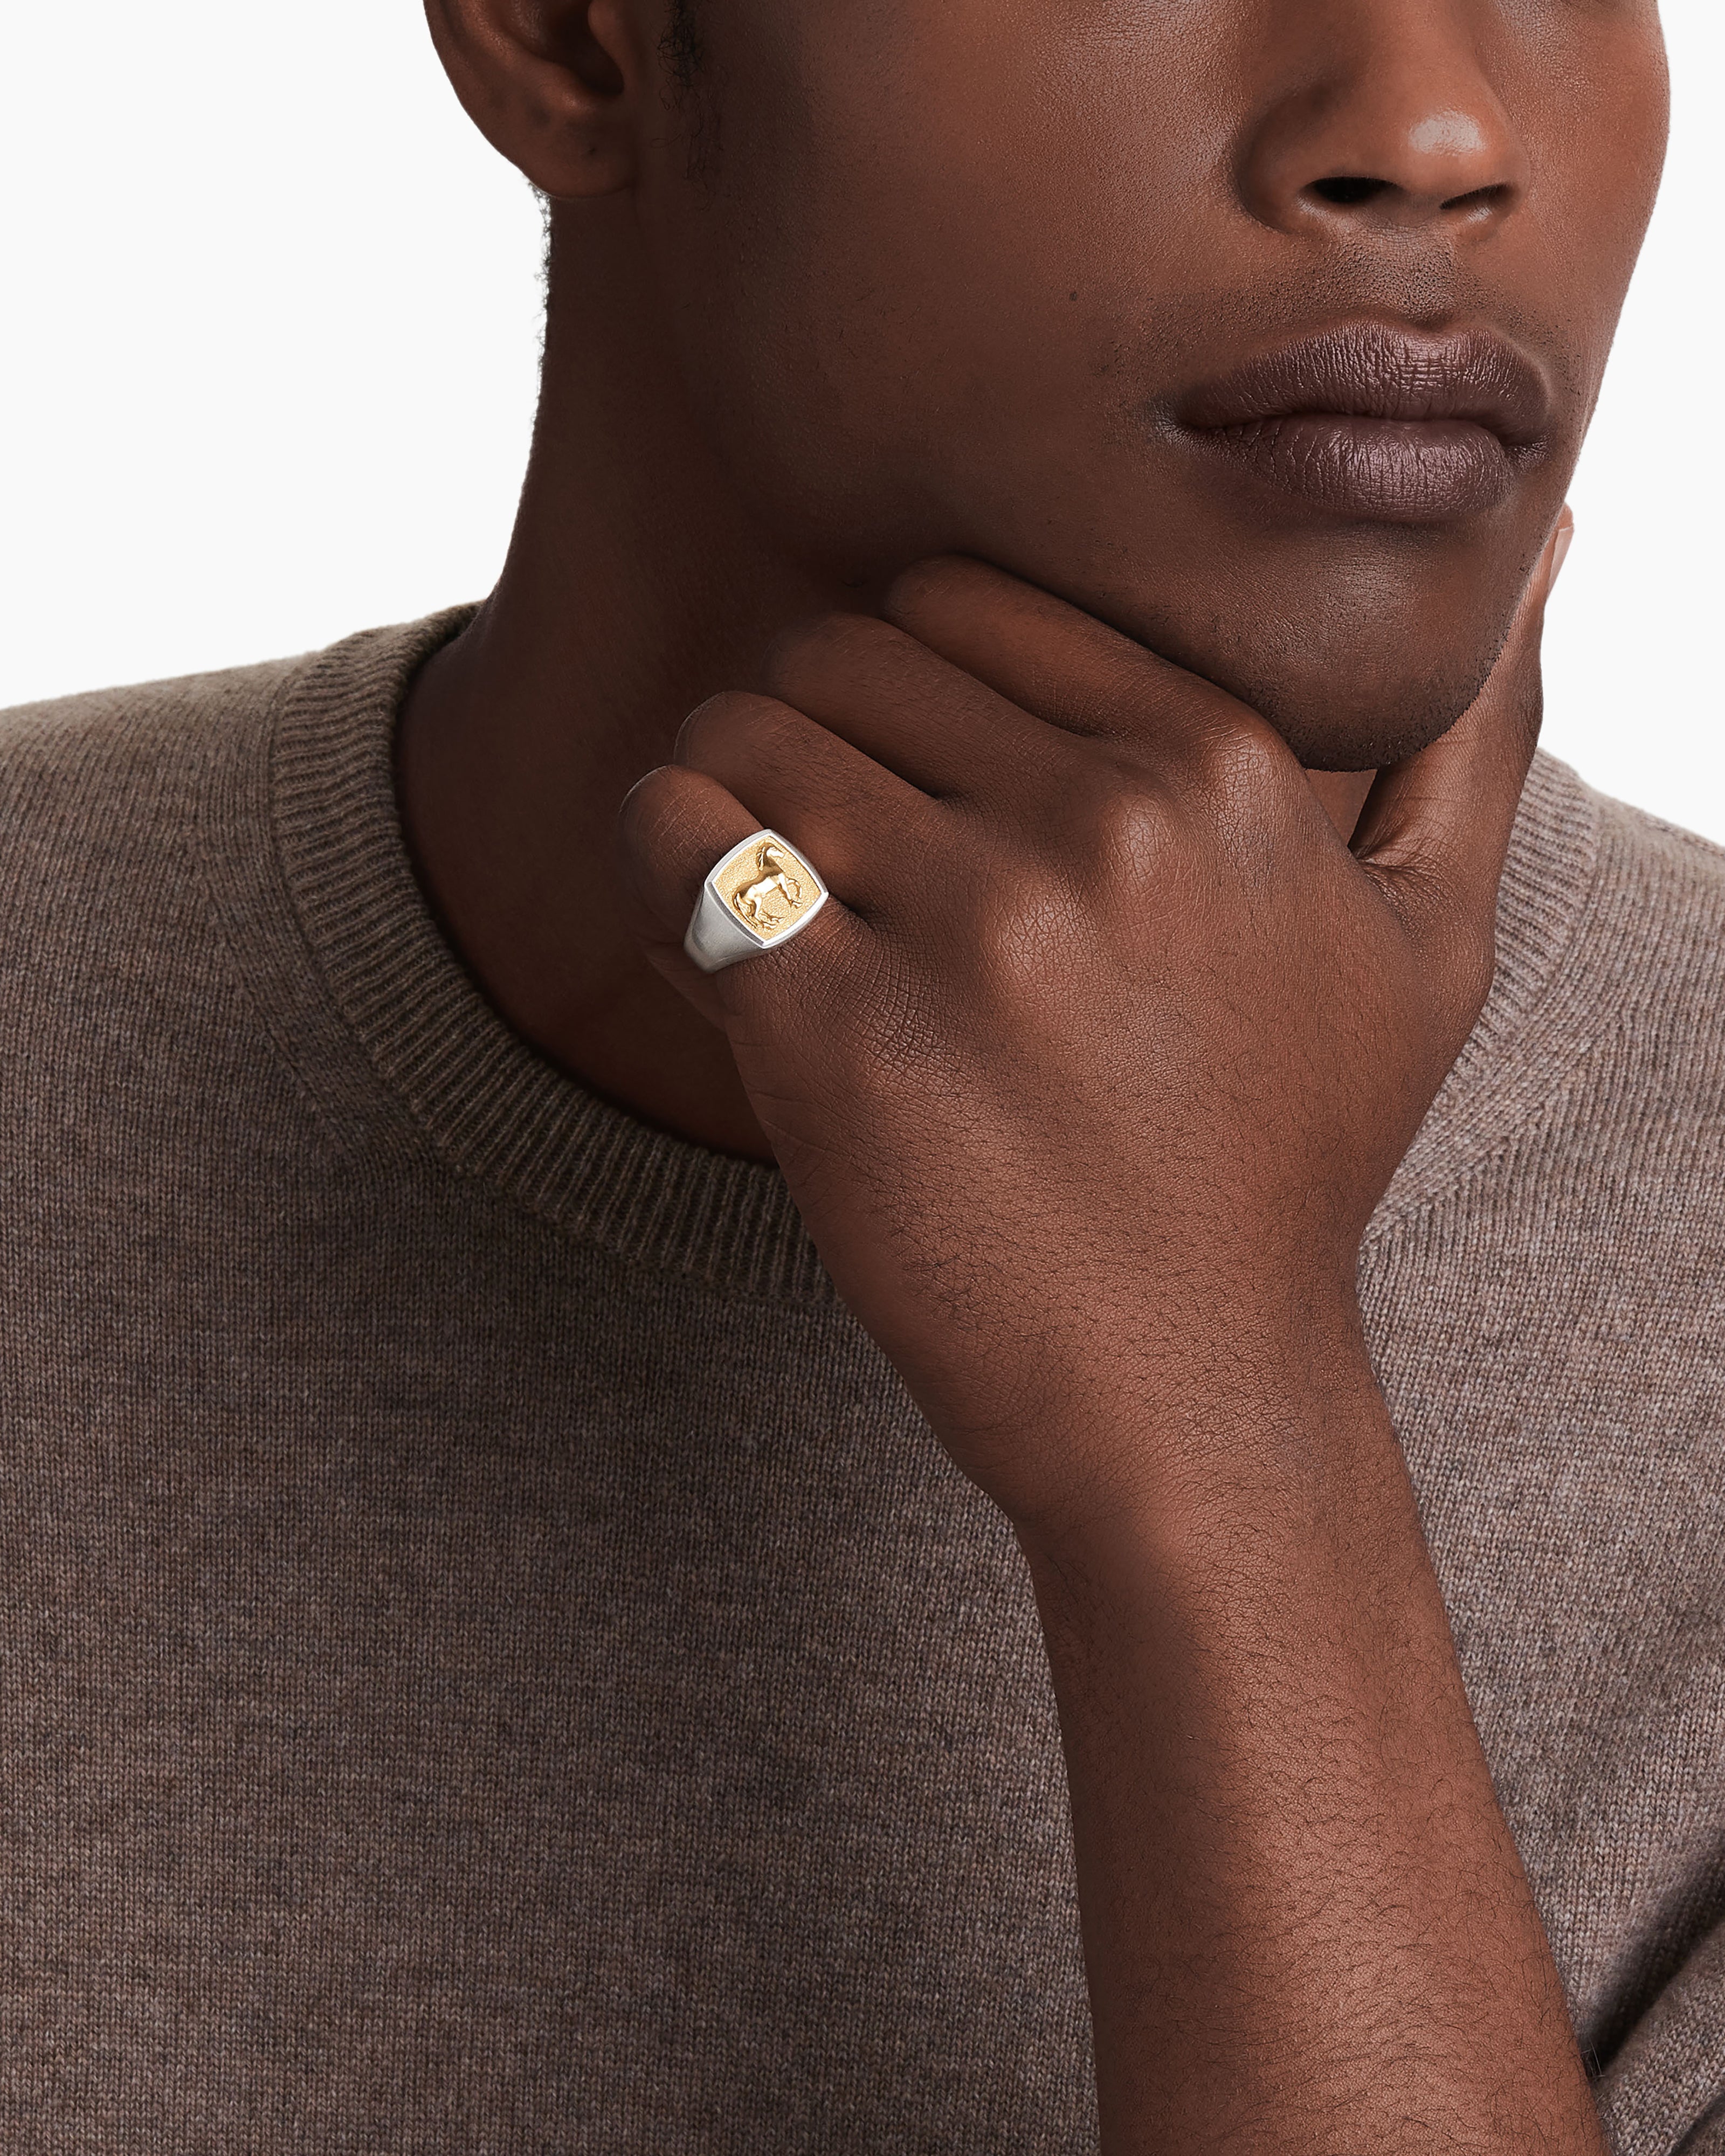 Pinky Rings: Symbolic Jewelry for Both Women and Men | MiaDonna